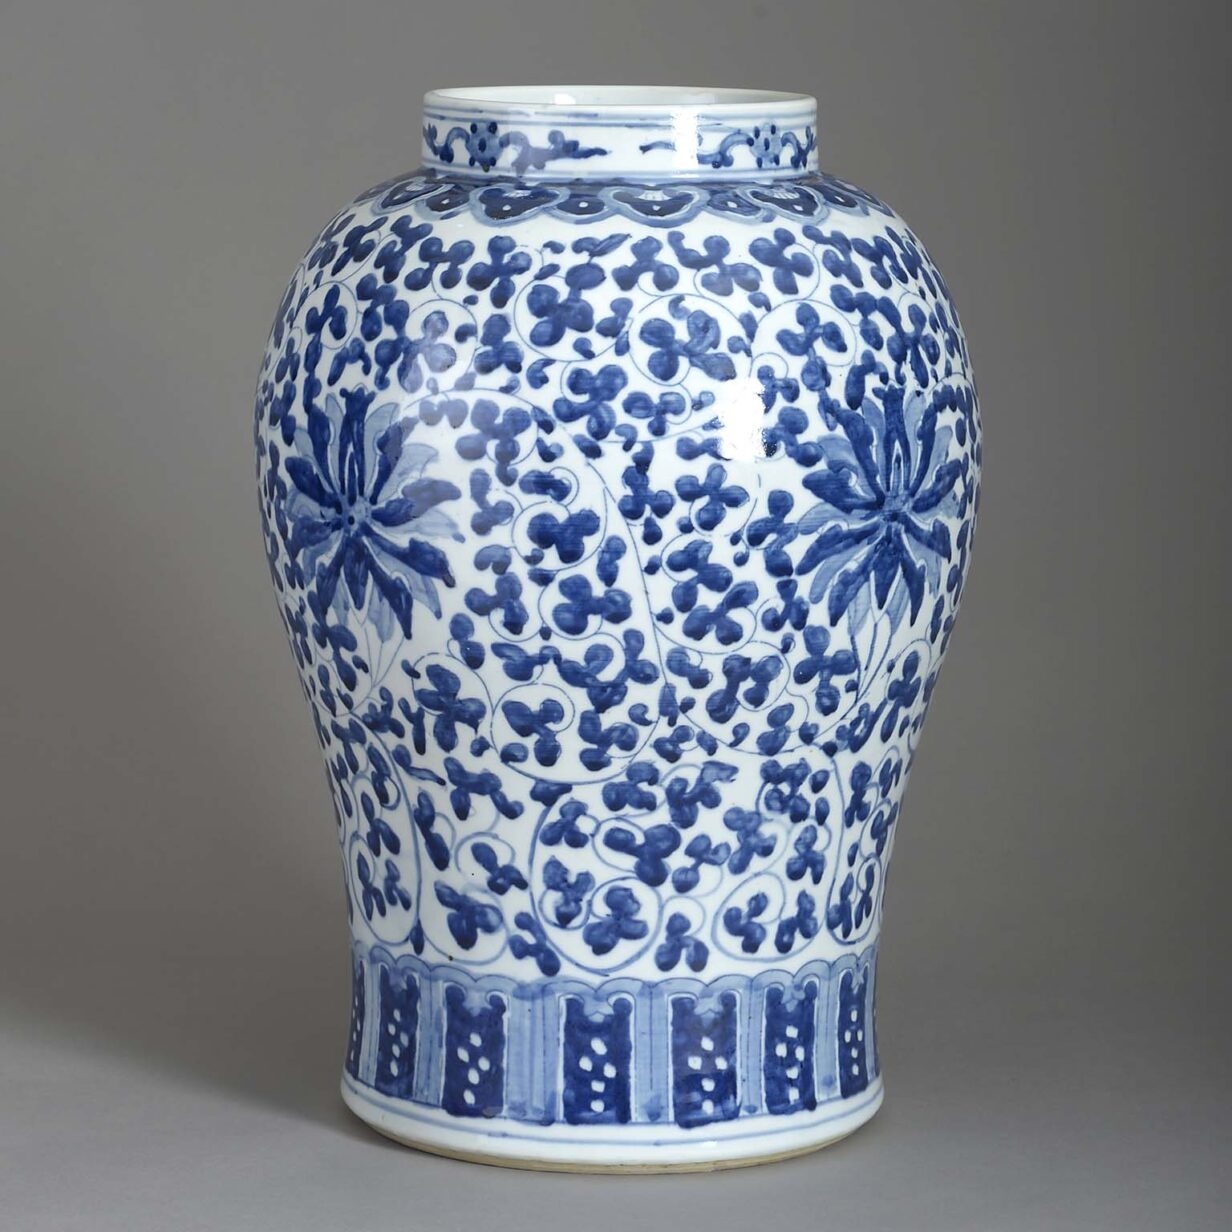 Blue and white chinese export porcelain vase